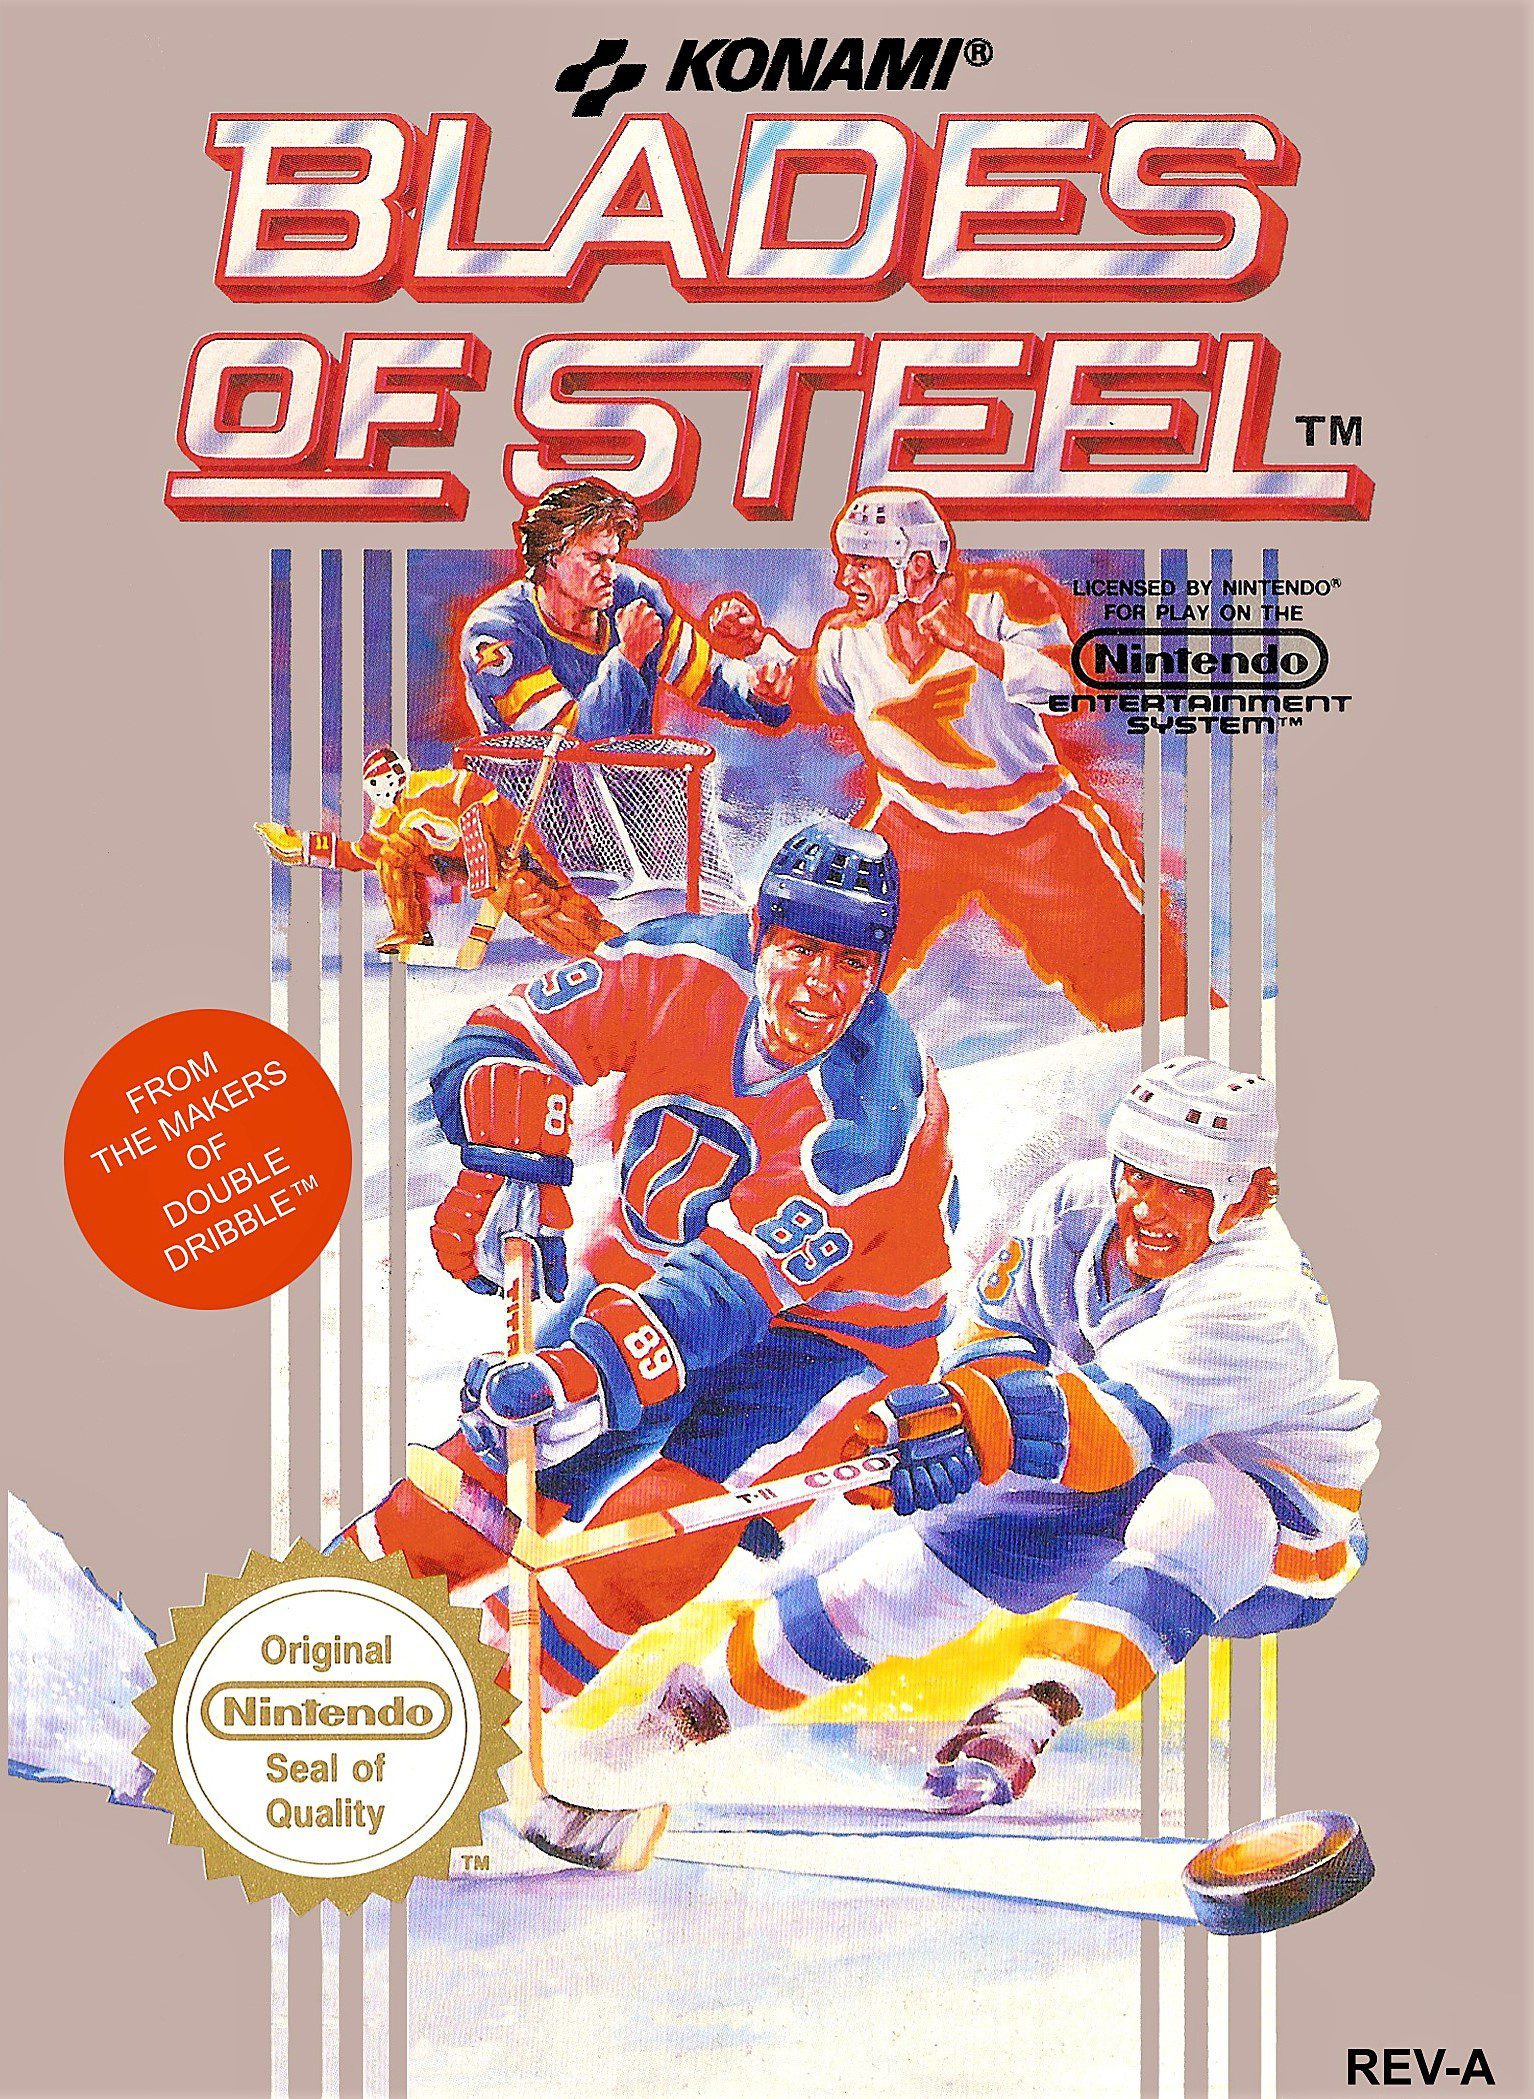 Blades of Steel for Nintendo Entertainment System (NES)